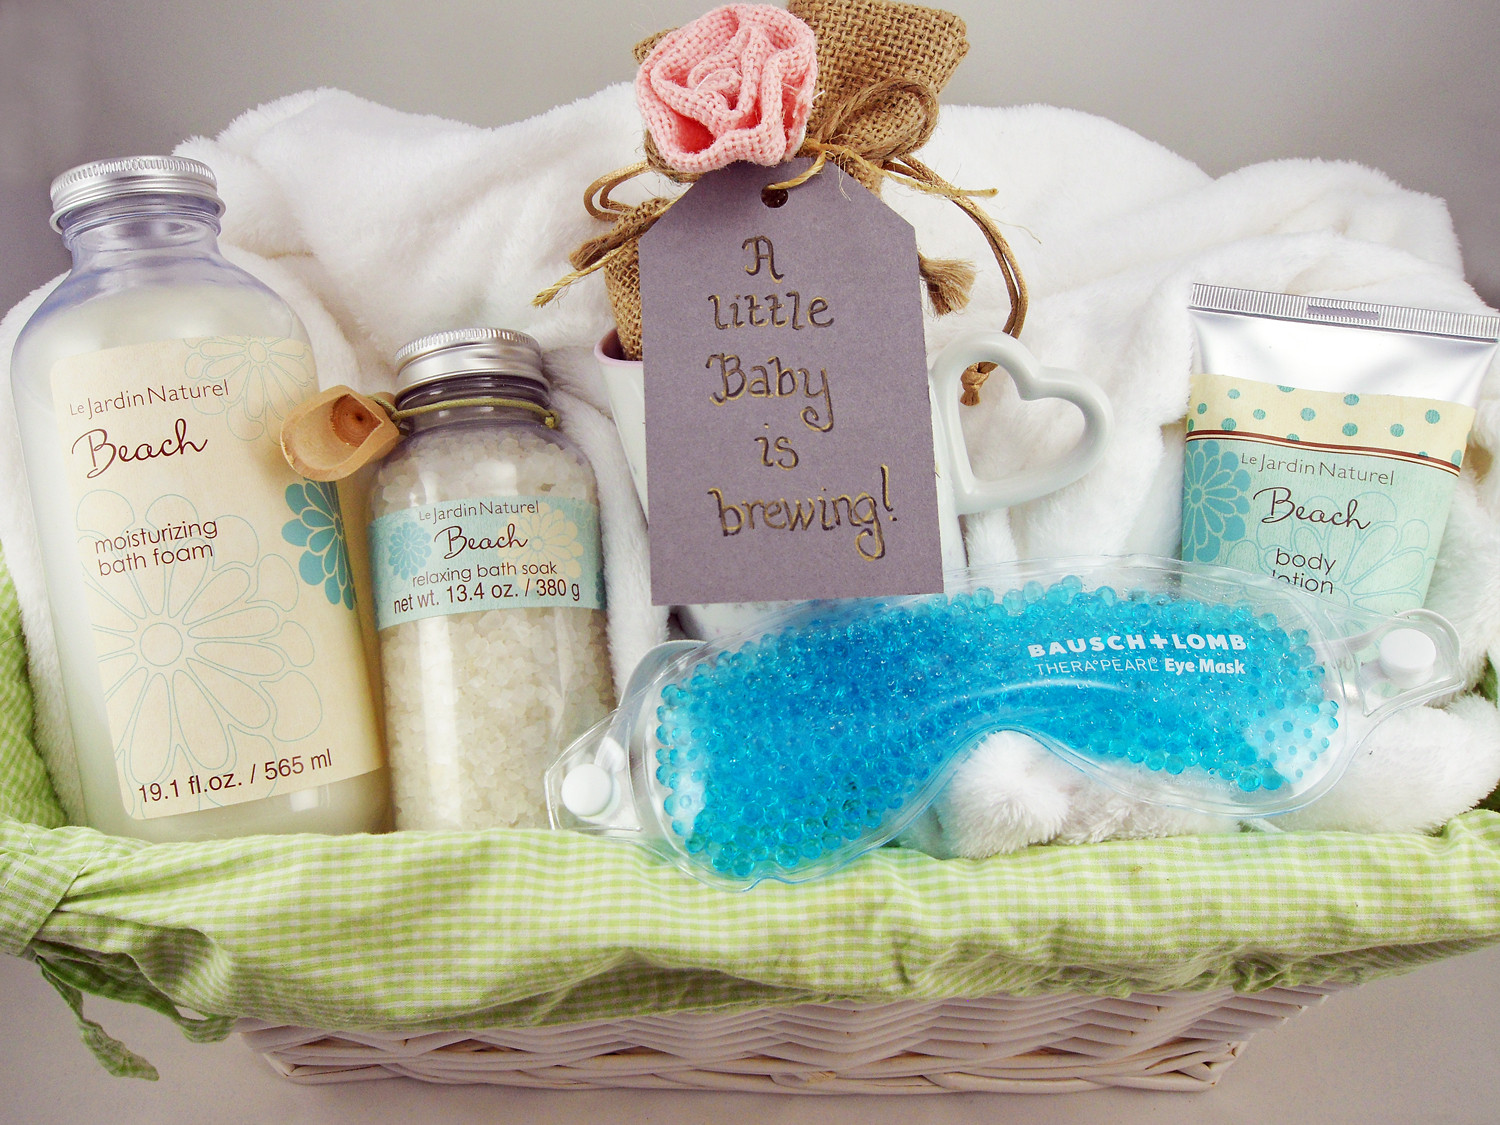 Original Baby Gift Ideas
 Expecting Couples Love These Unique Personalized Baby Gifts